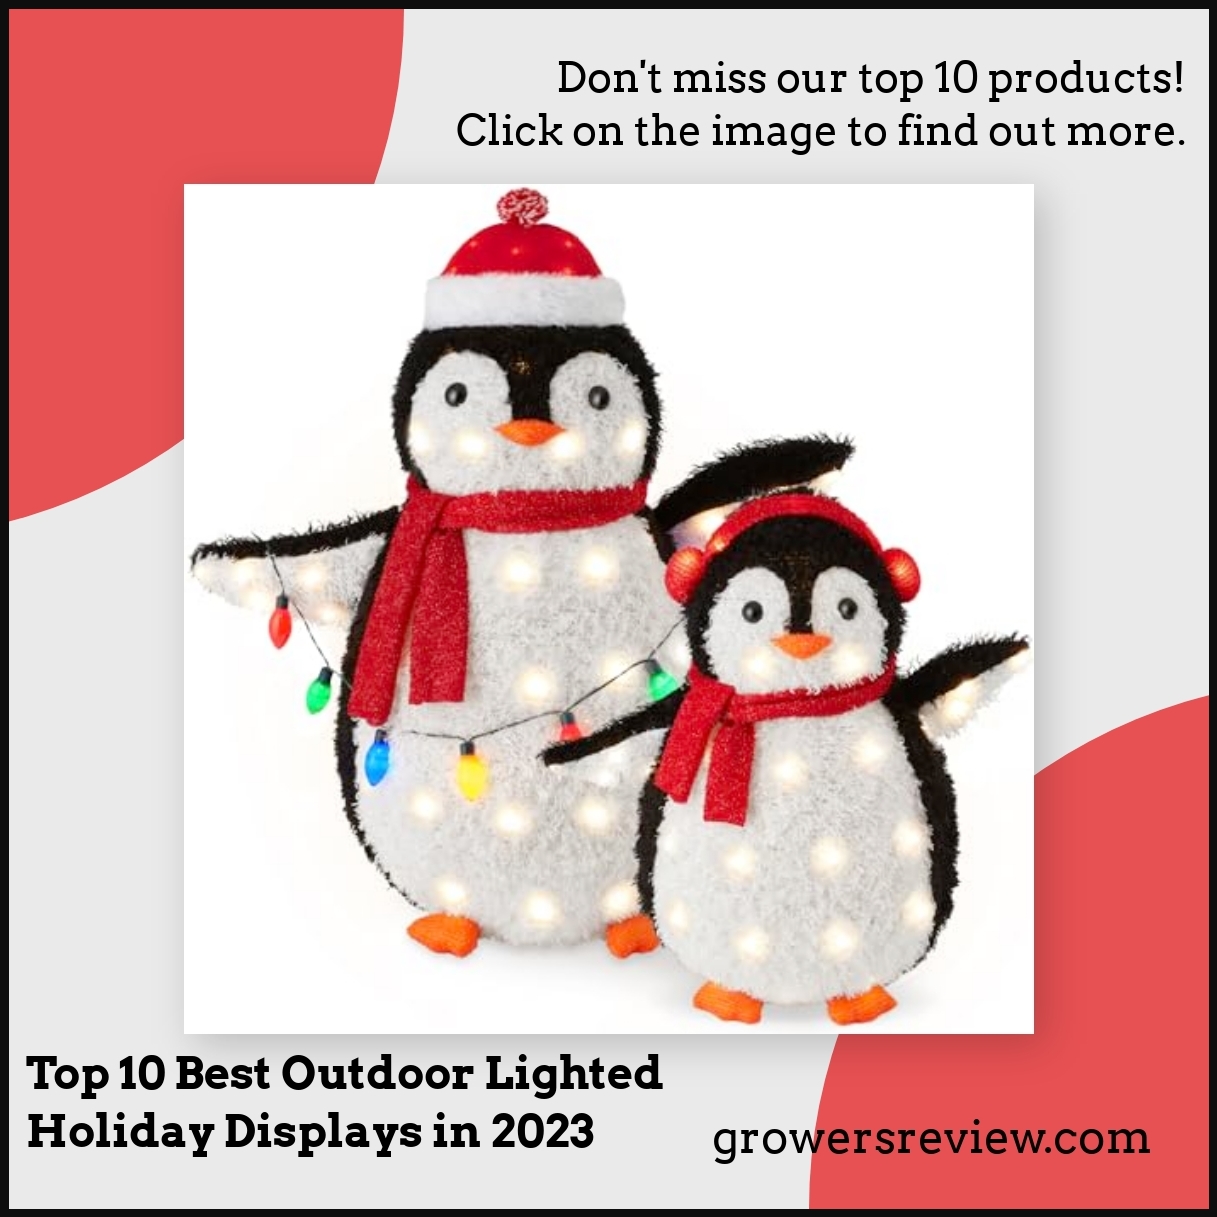 Top 10 Best Outdoor Lighted Holiday Displays in 2023